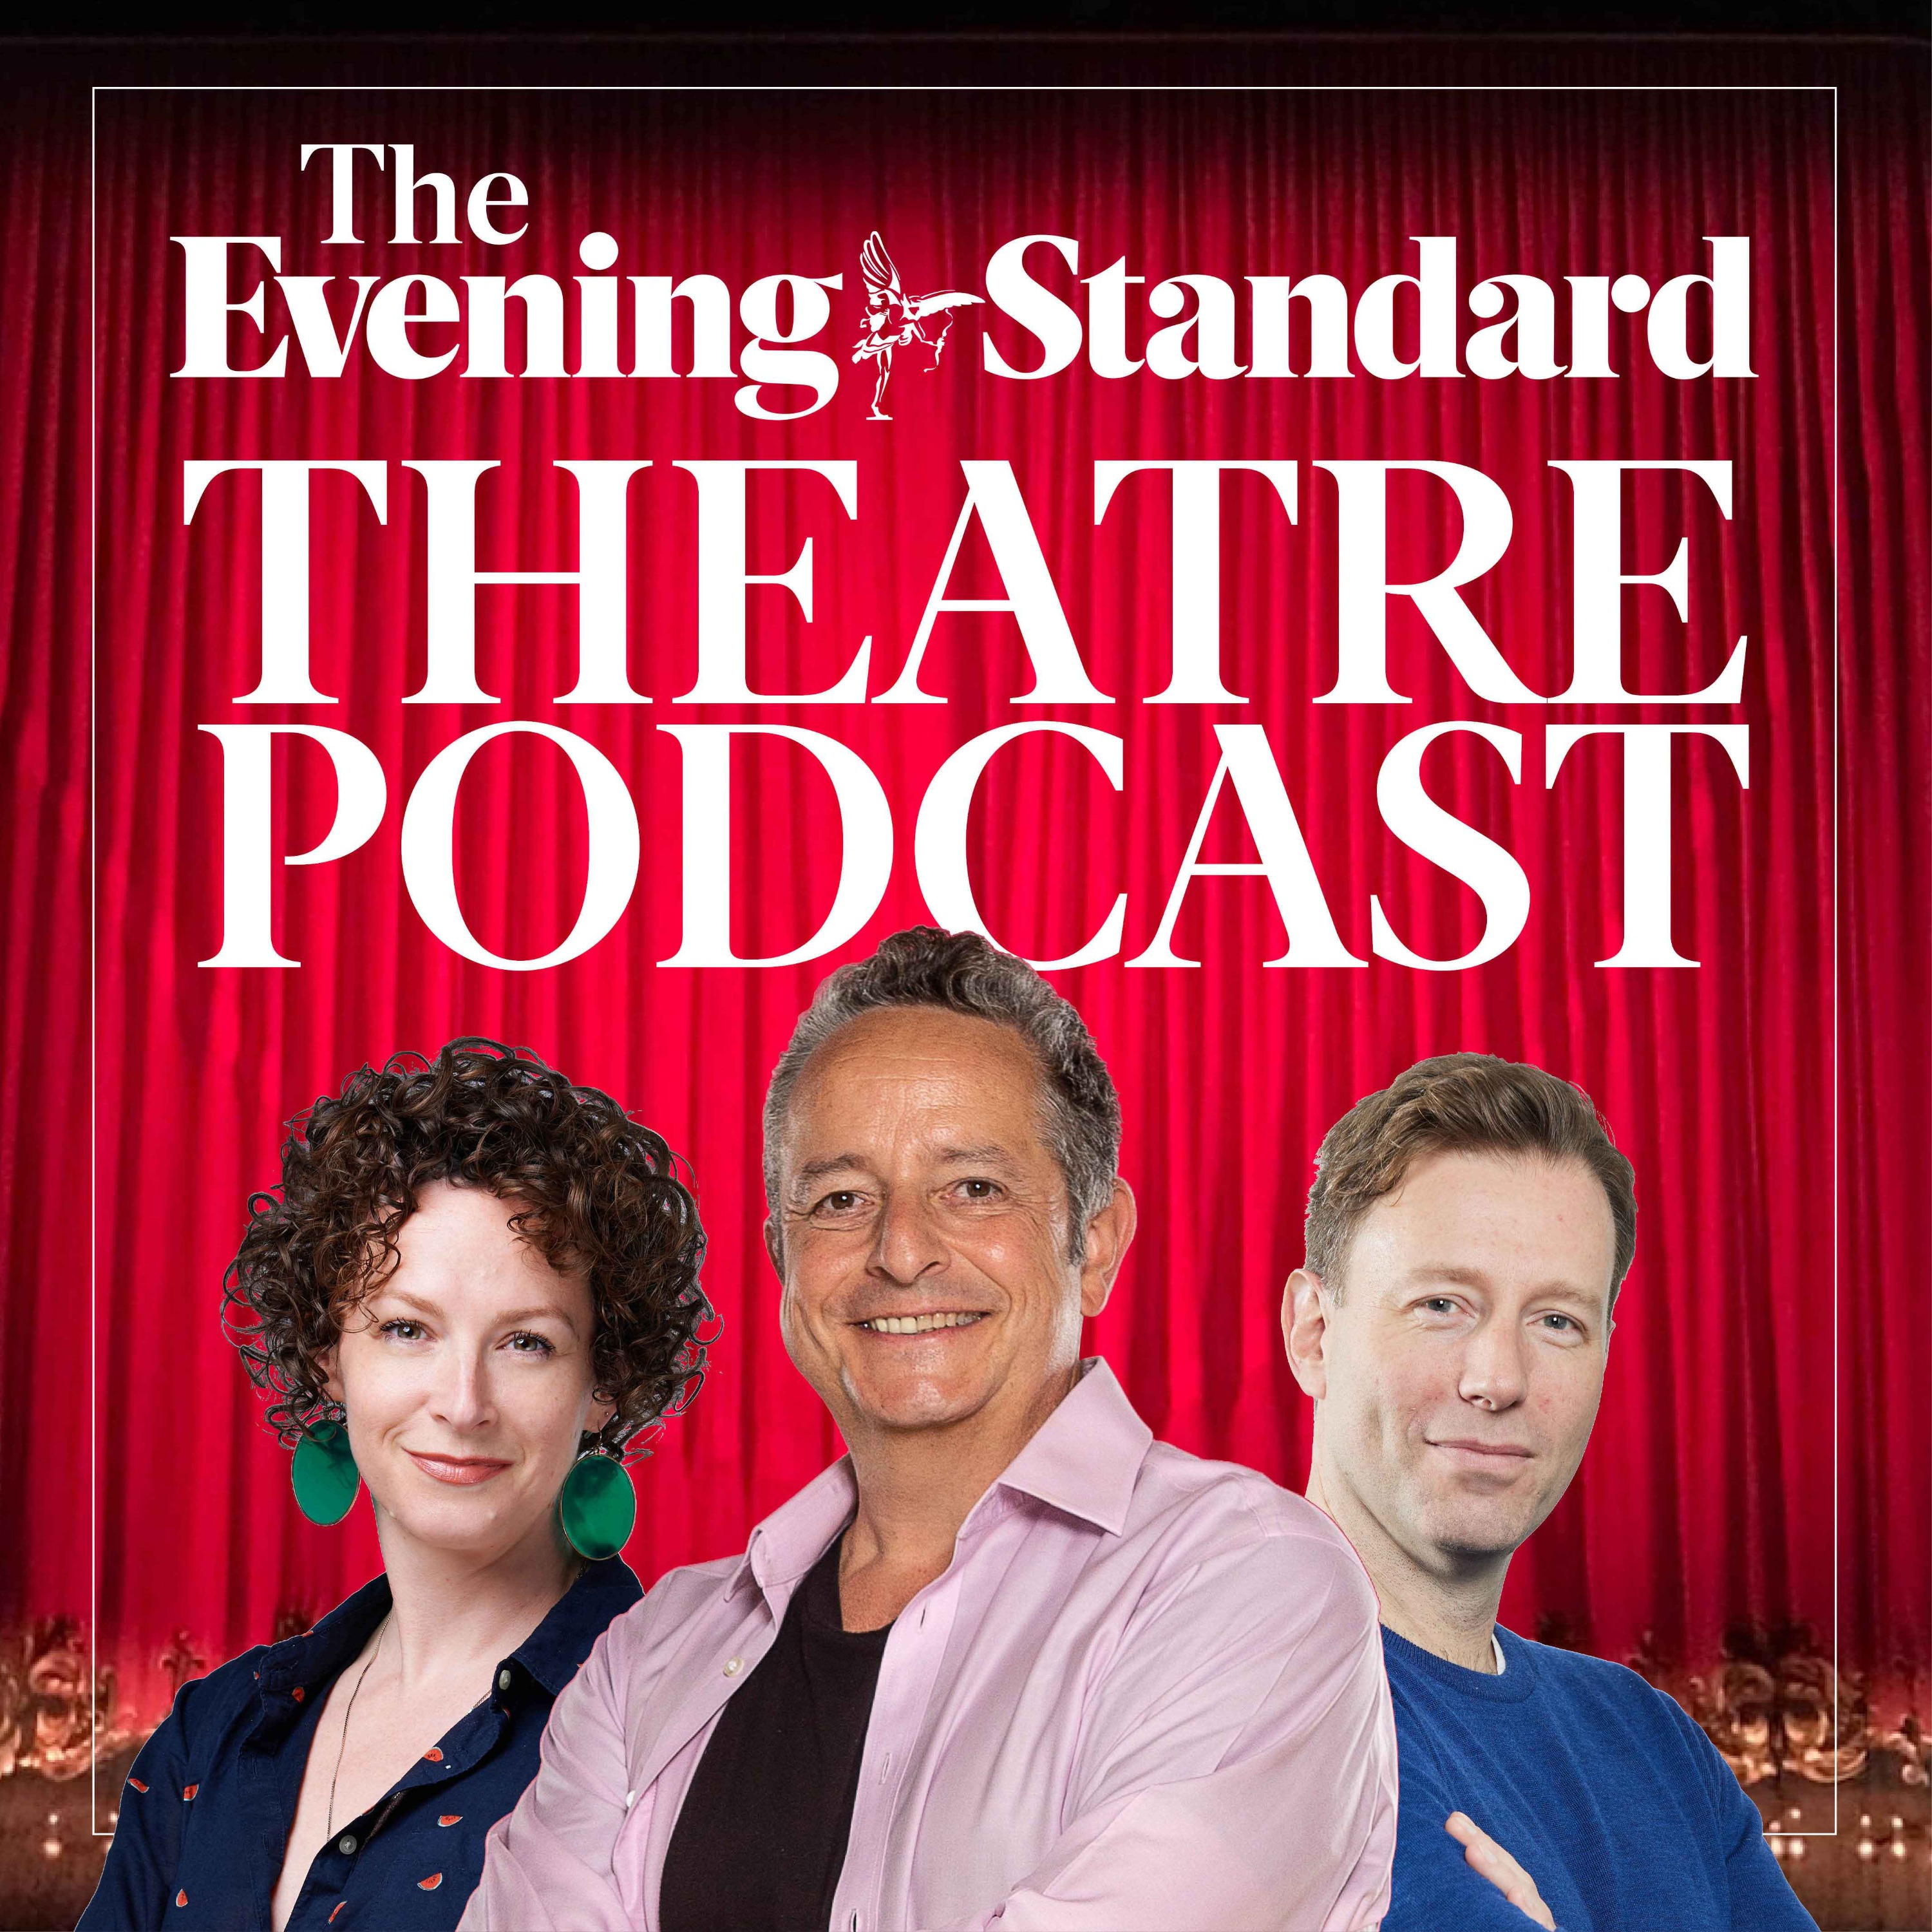 The Evening Standard Theatre Podcast...